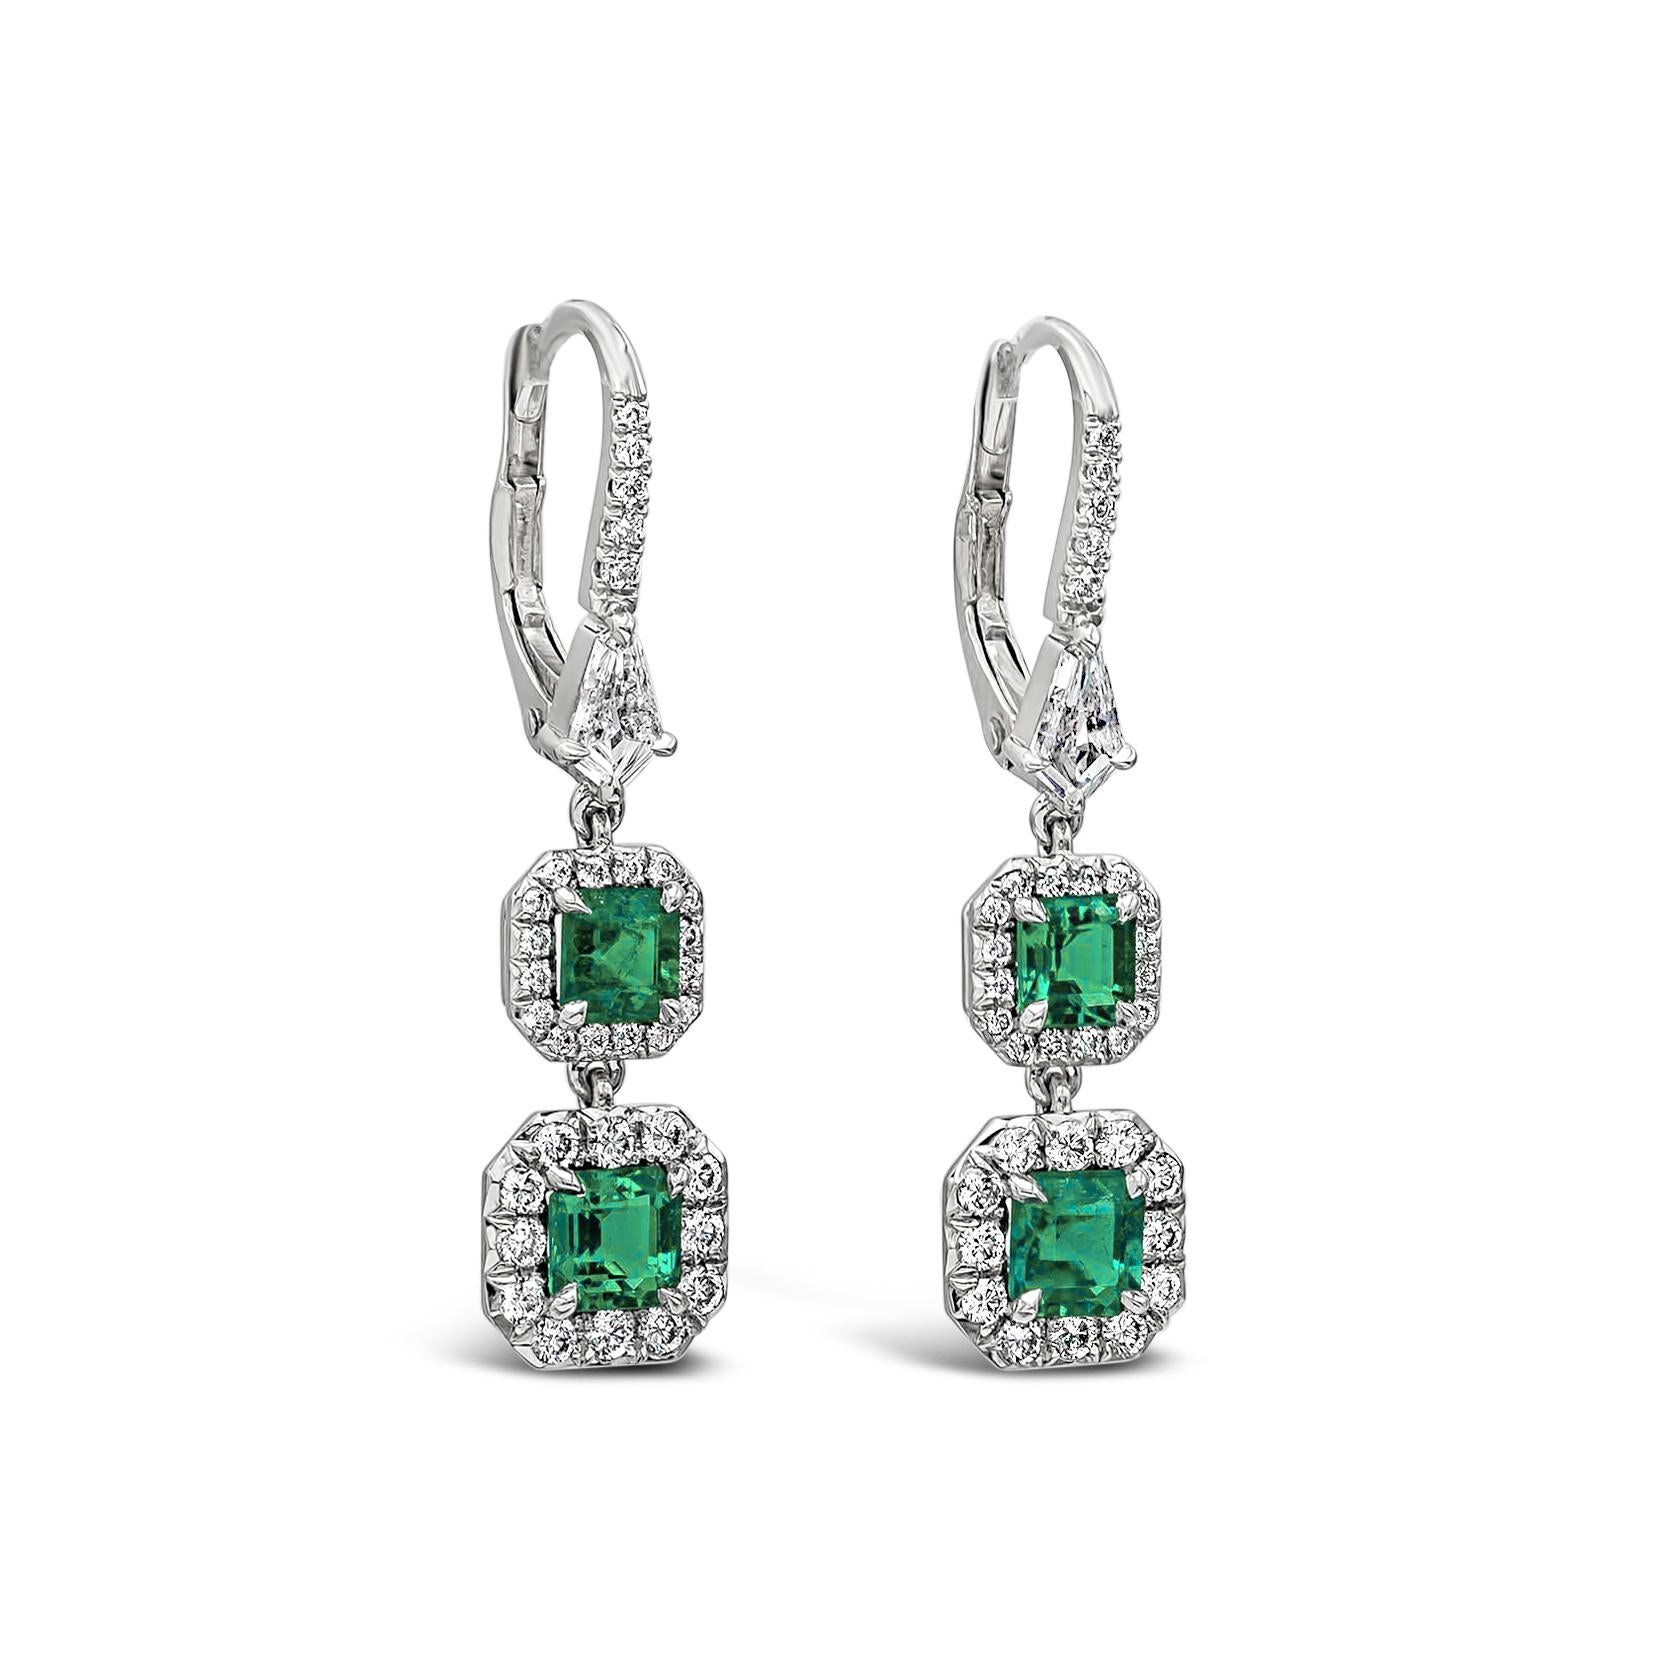 A spectacular piece of jewelry showcasing 2 dangling vibrant Colombian emeralds on each earring surrounded by a brilliant round diamond halo, connected to a diamond encrusted platinum lever-back. Emeralds weigh 1.53 carats total, diamonds weigh 0.94